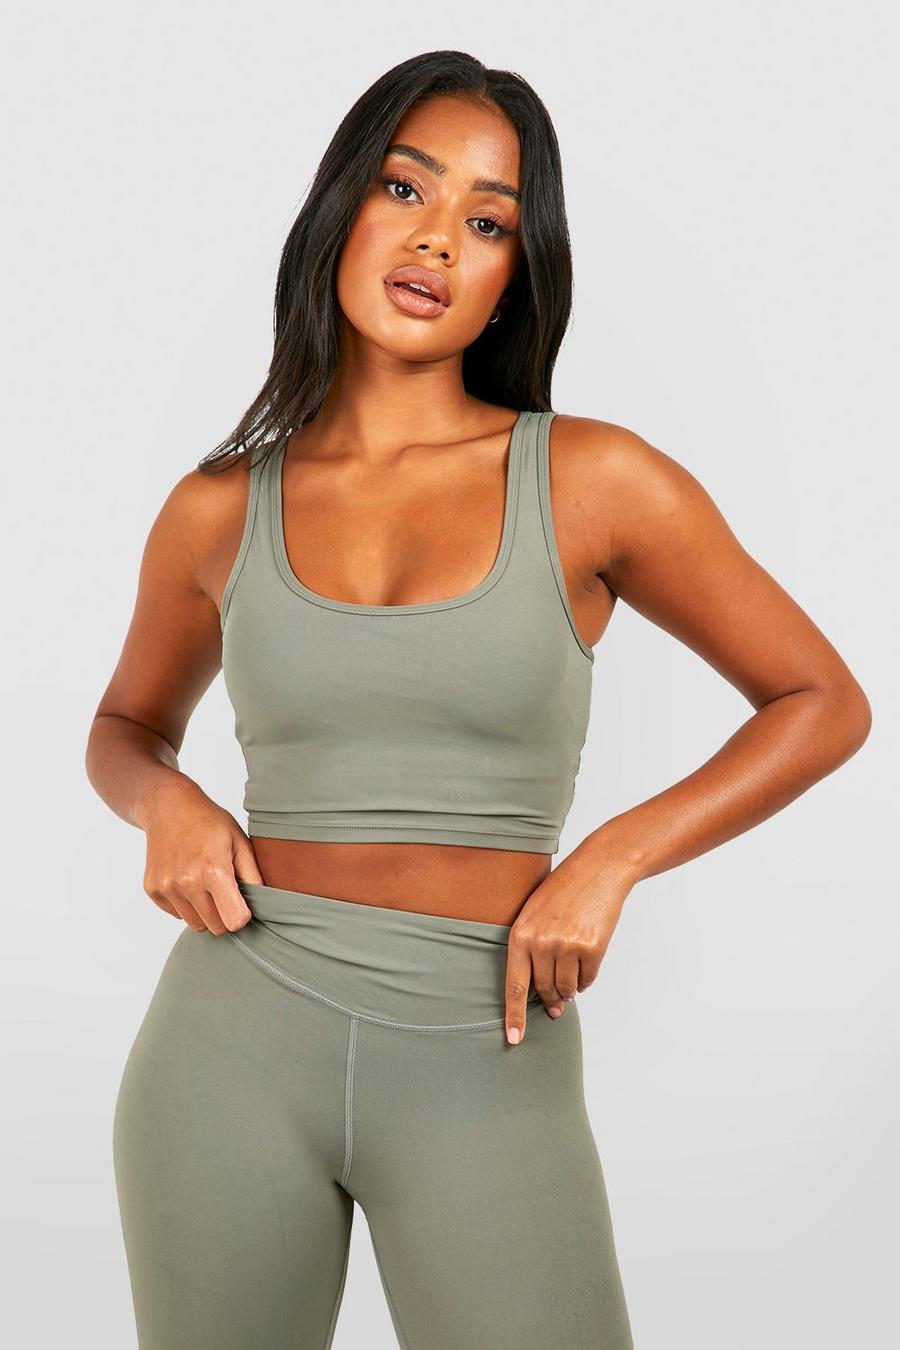 Khaki DSGN Studio Supersoft Peached Sculpt Padded Sports Bra image number 1